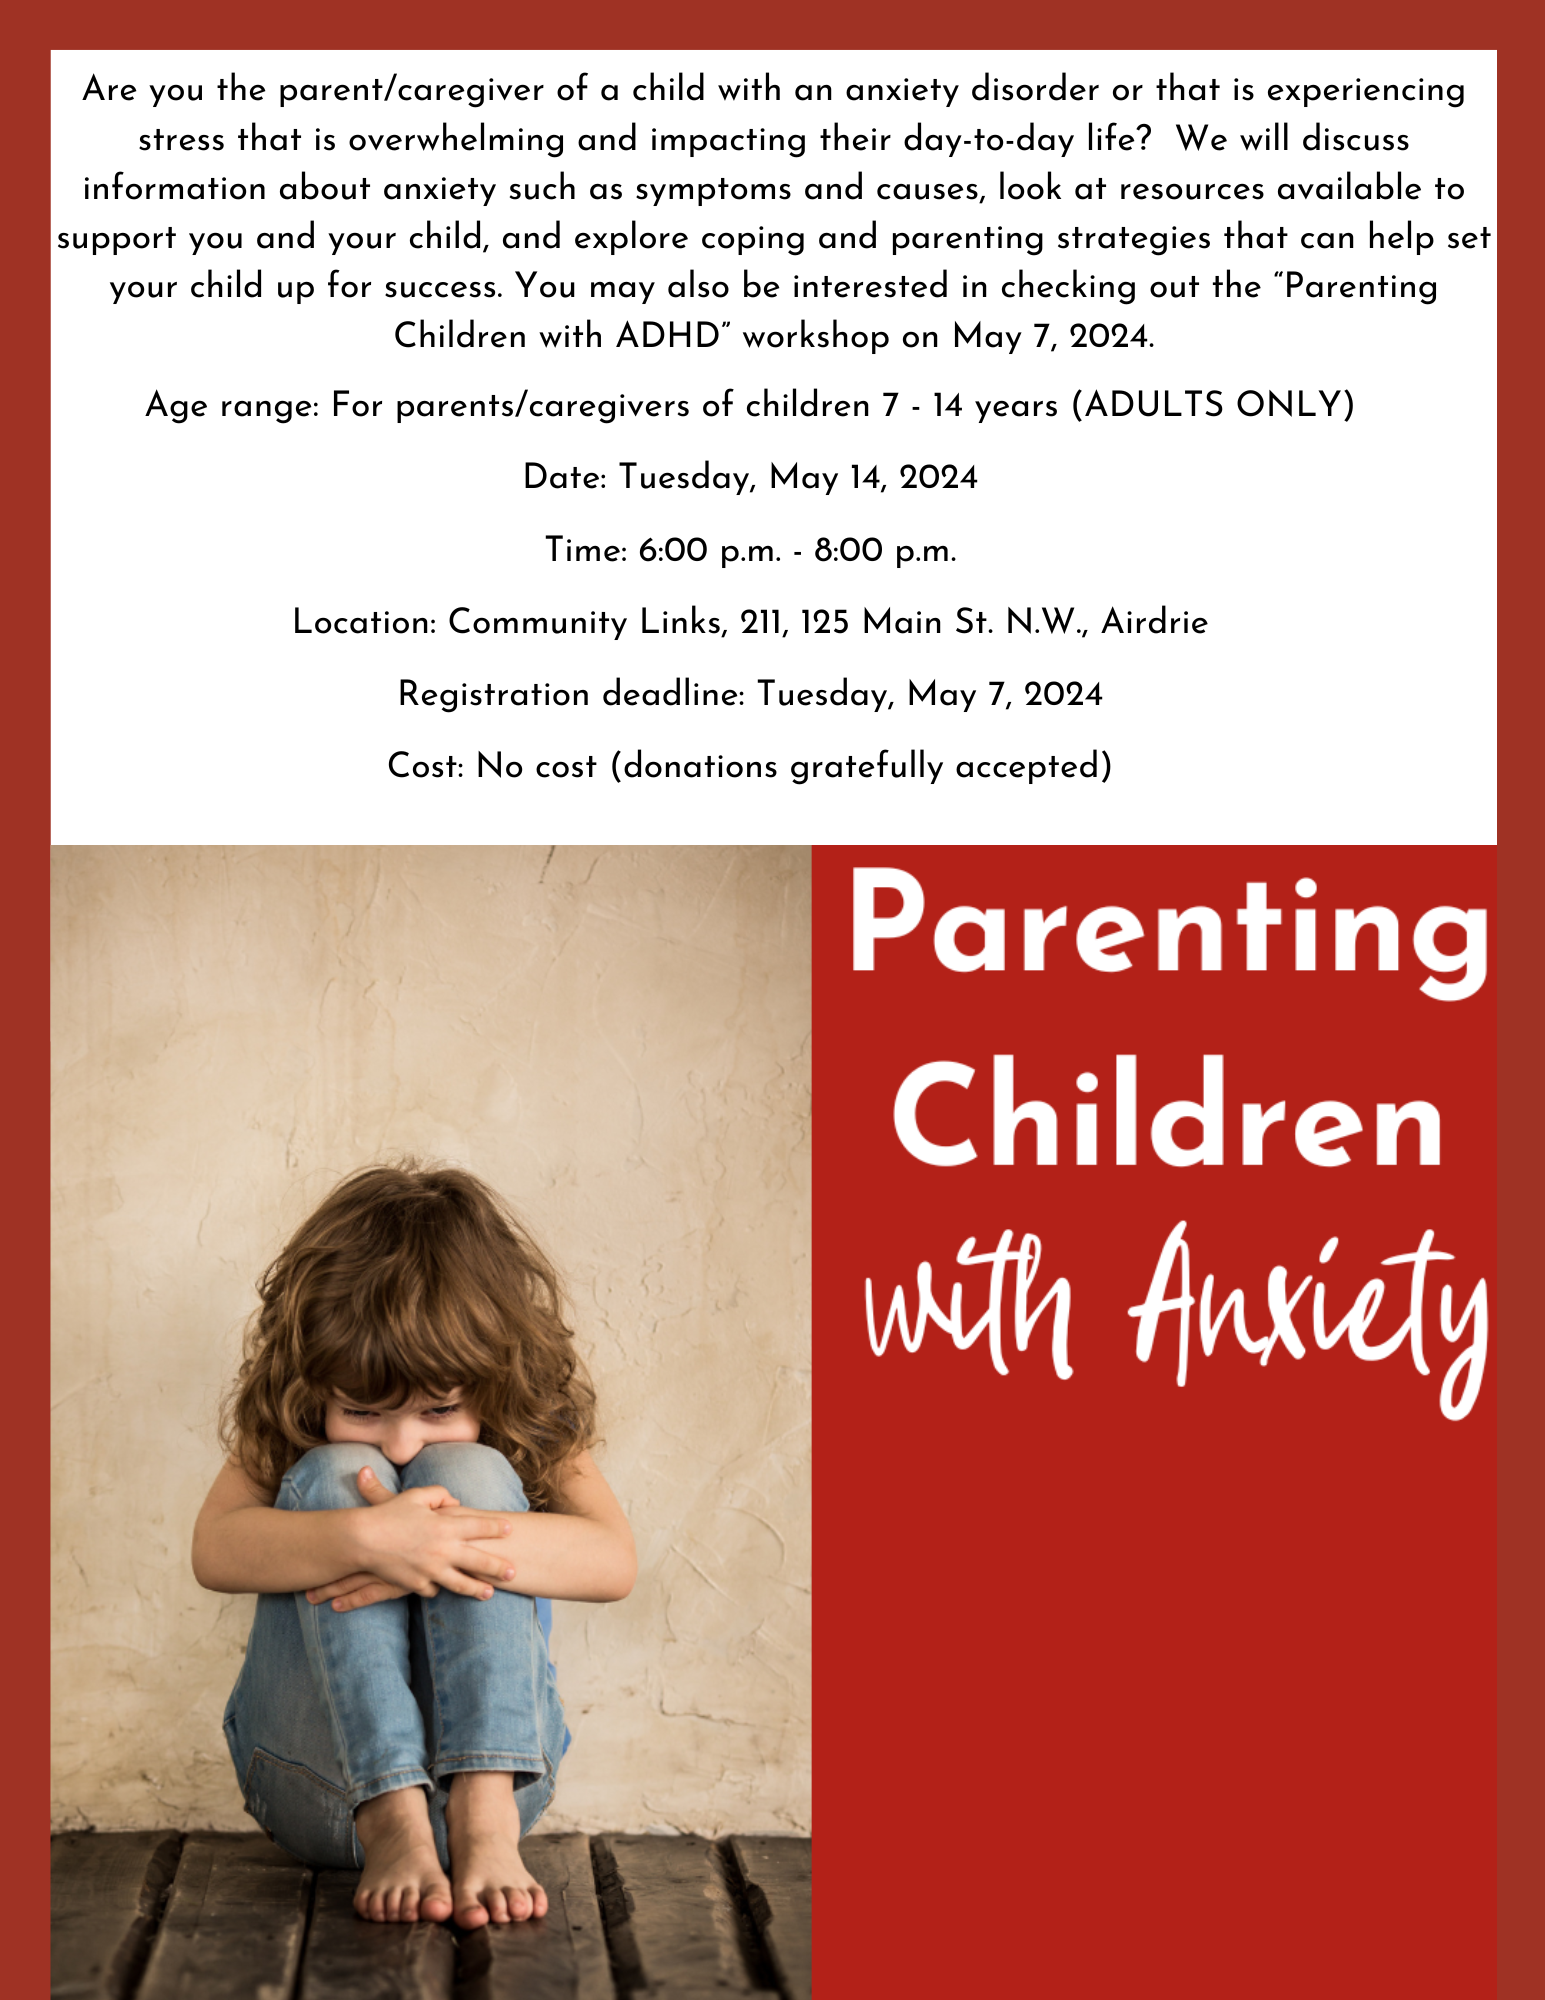 Parenting Children with Anxiety